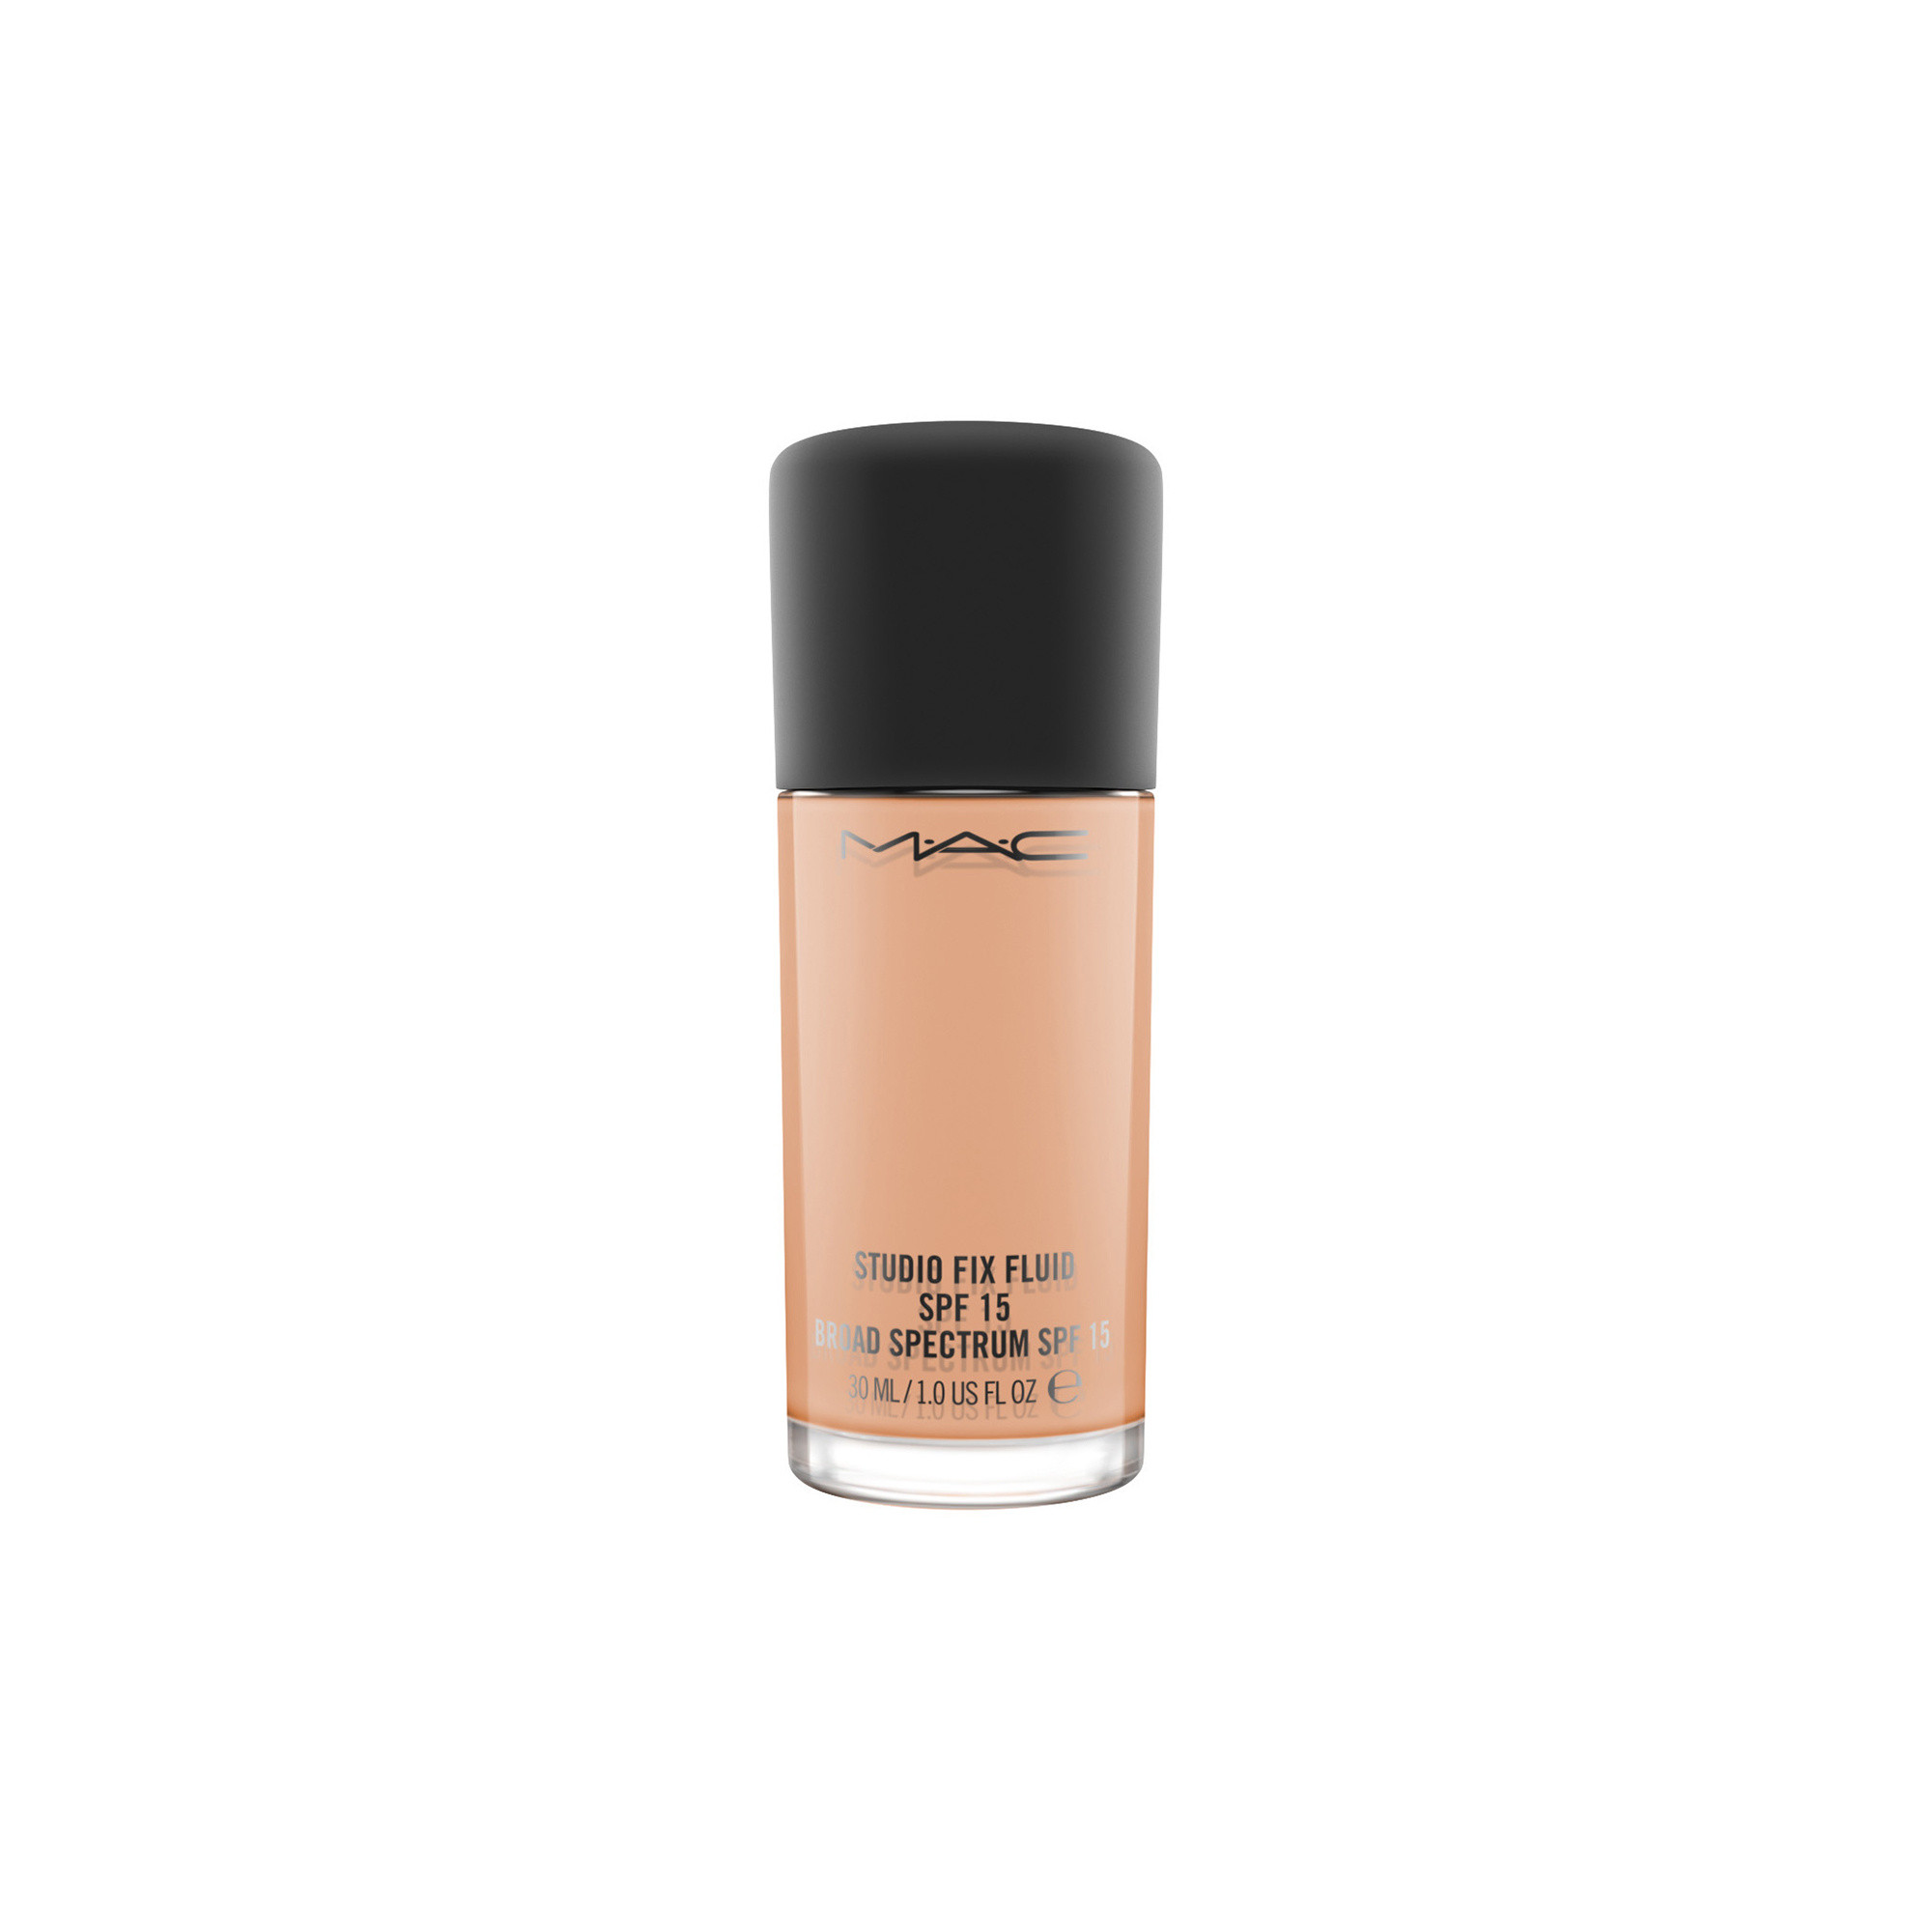 Studio Fix Fluid Foundation Spf15 - NW33, NW33, large image number 0